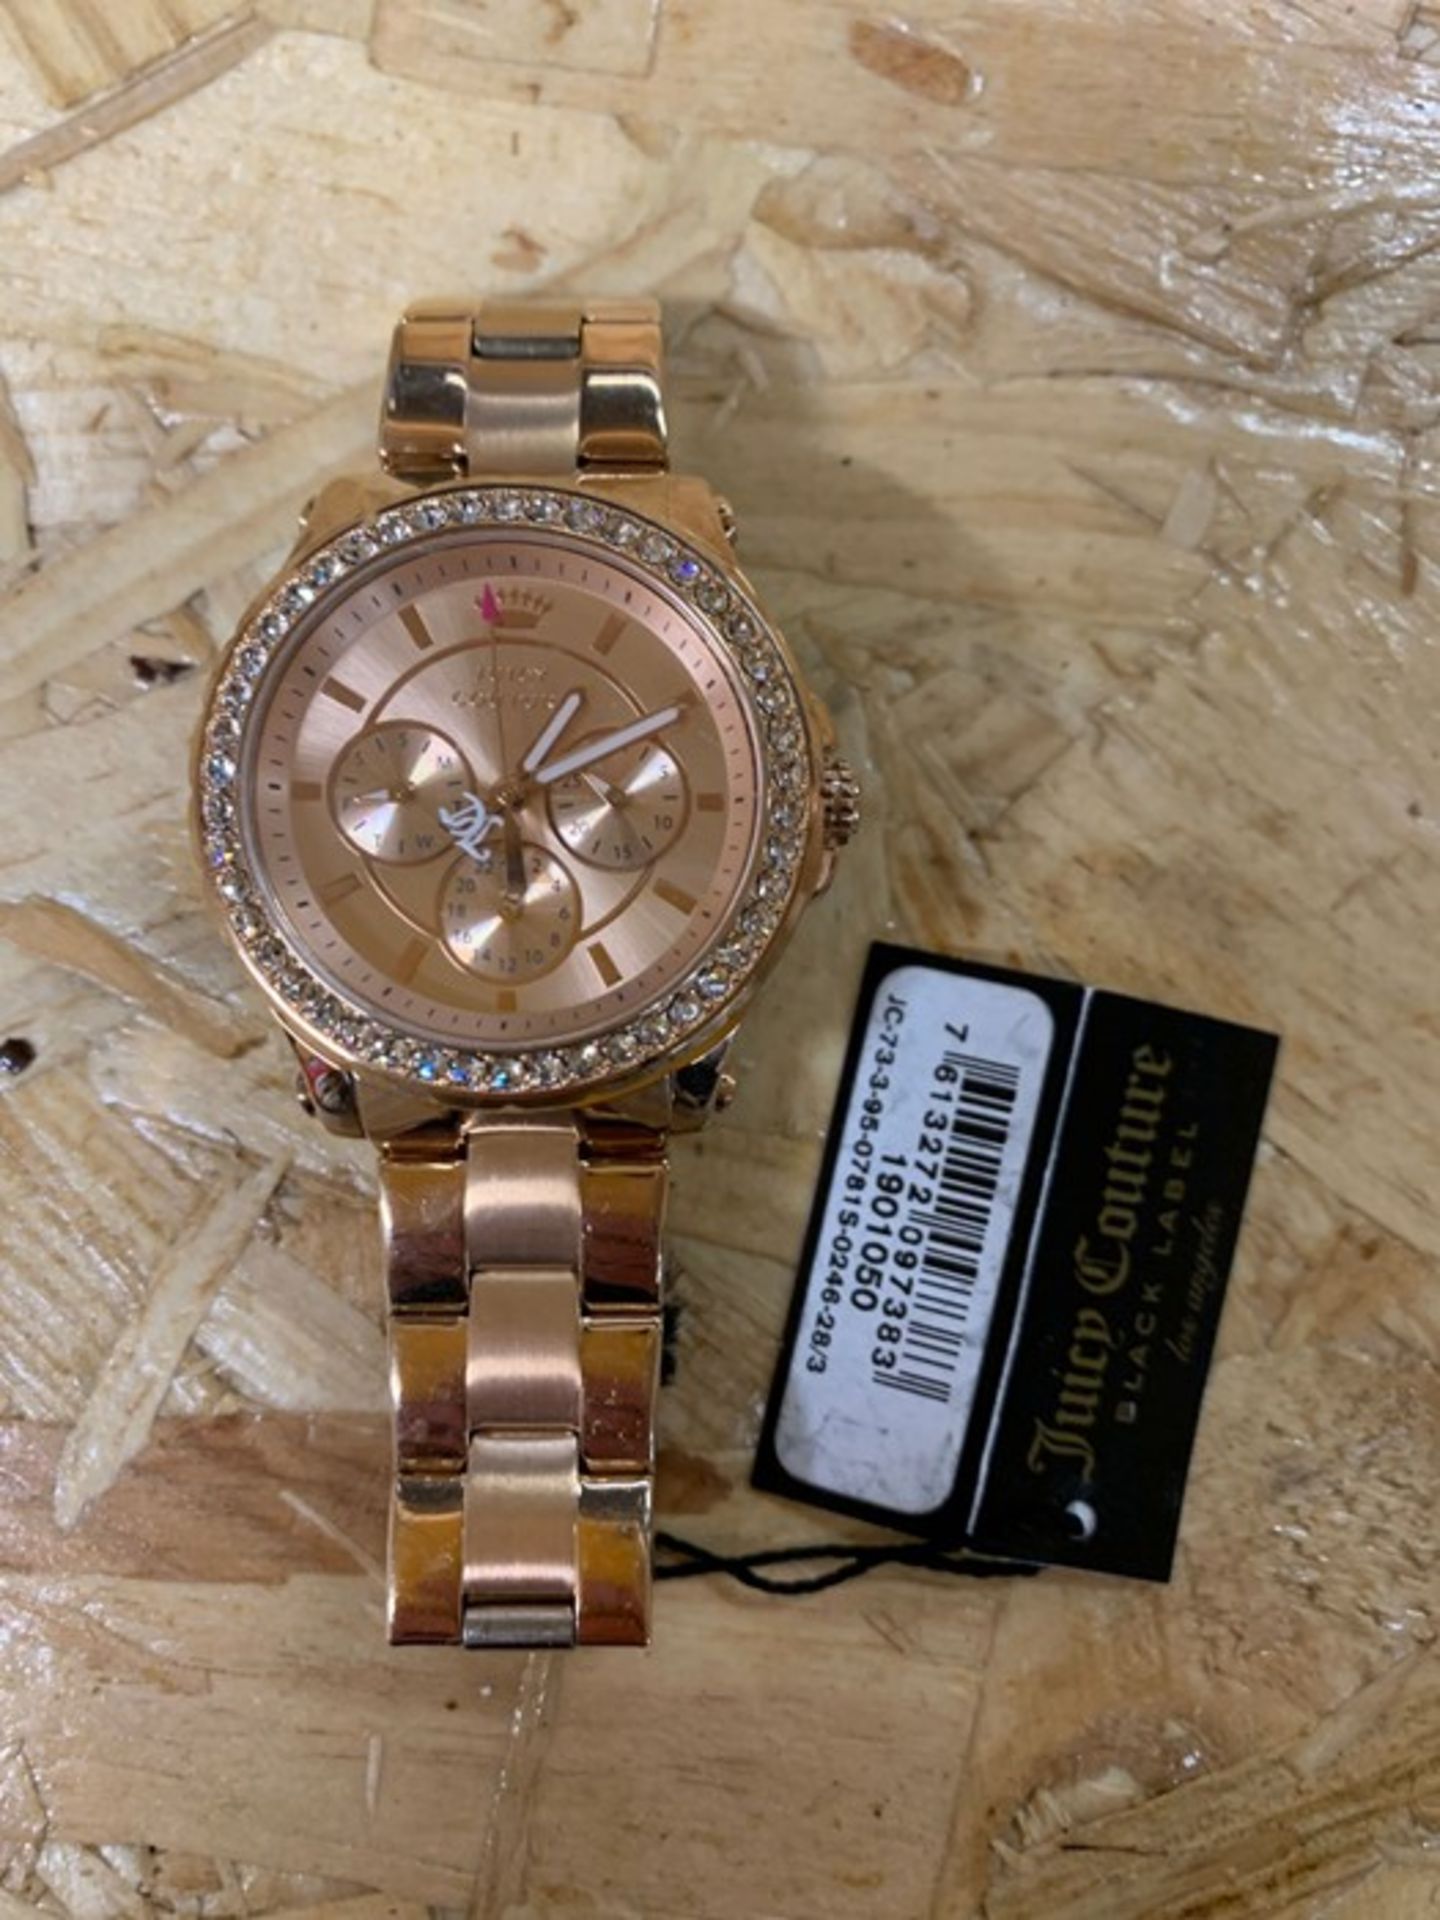 1 x UNBOXED LADIES JUICY COUTURE PEDIGREE WATCH 1901050 IN ROSE GOLD RRP £185